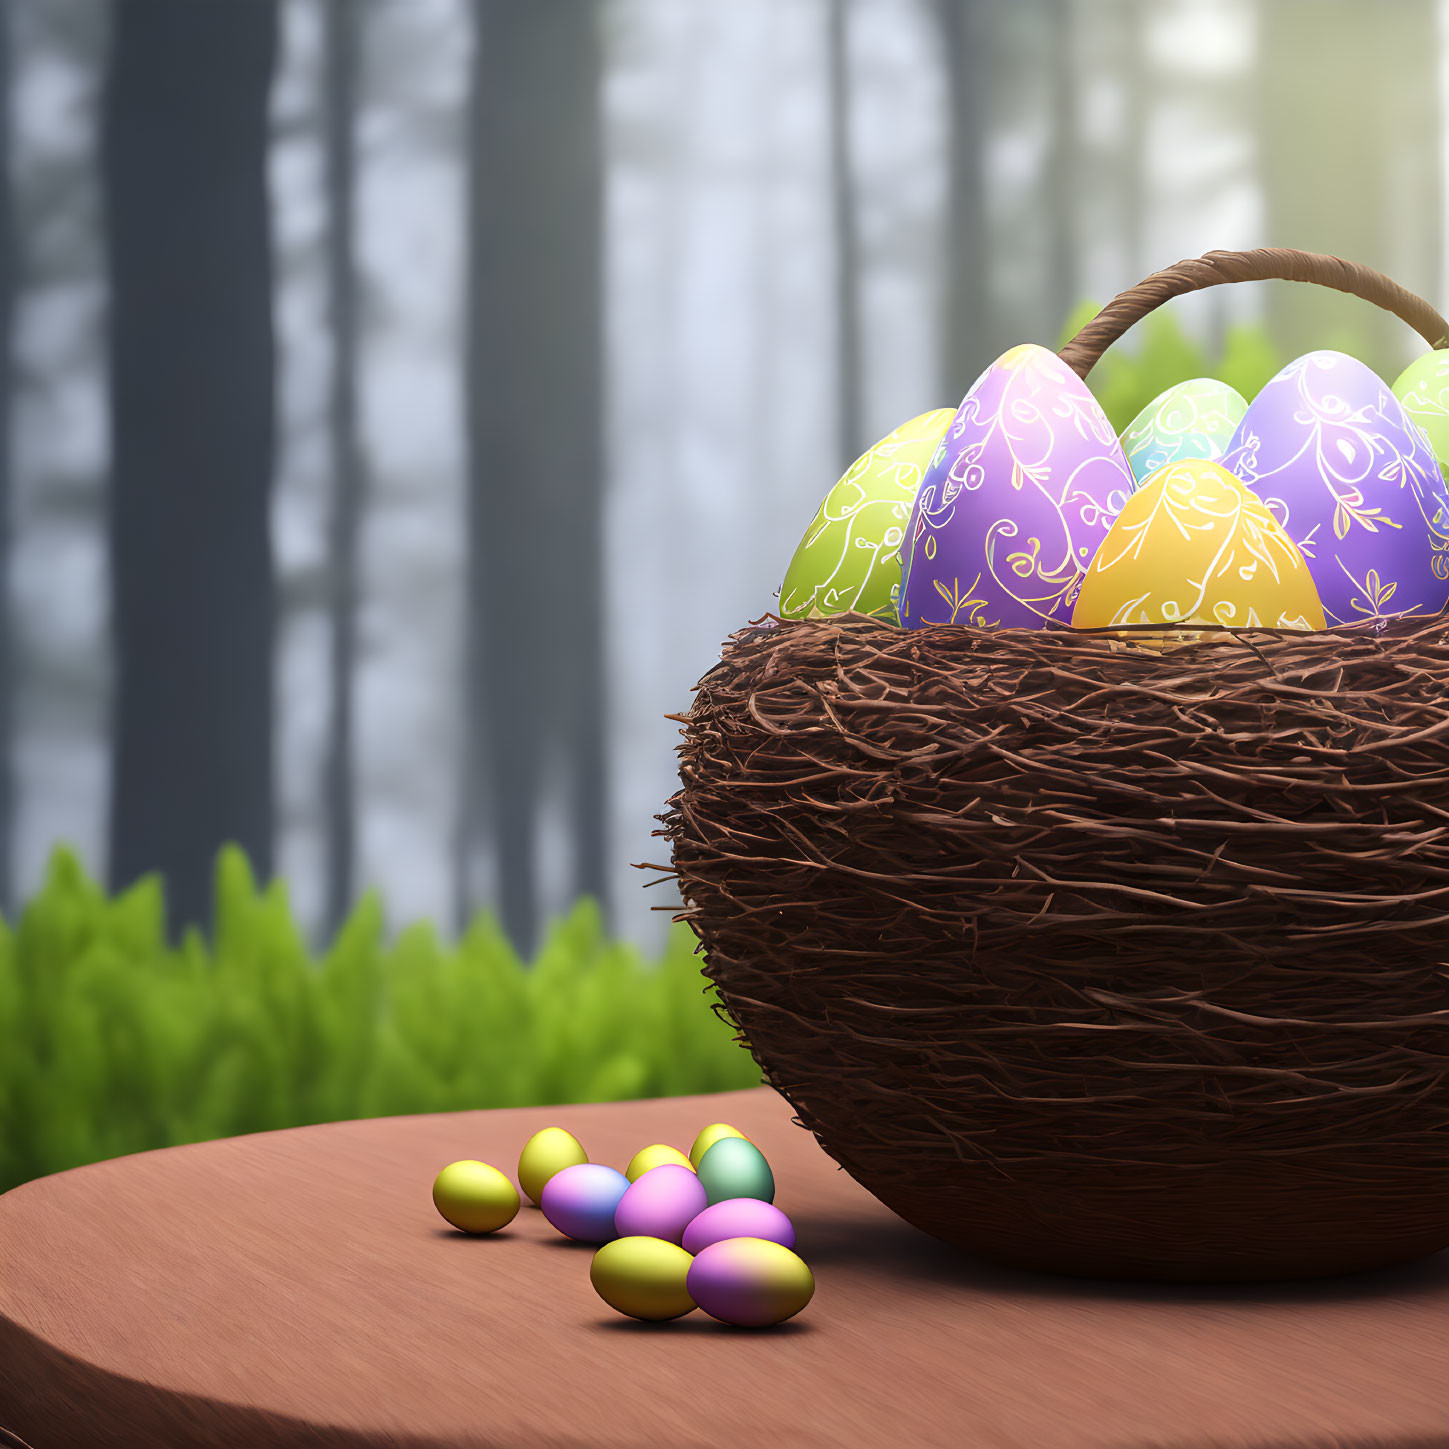 Decorated Easter eggs in wicker basket on wooden surface with misty forest background